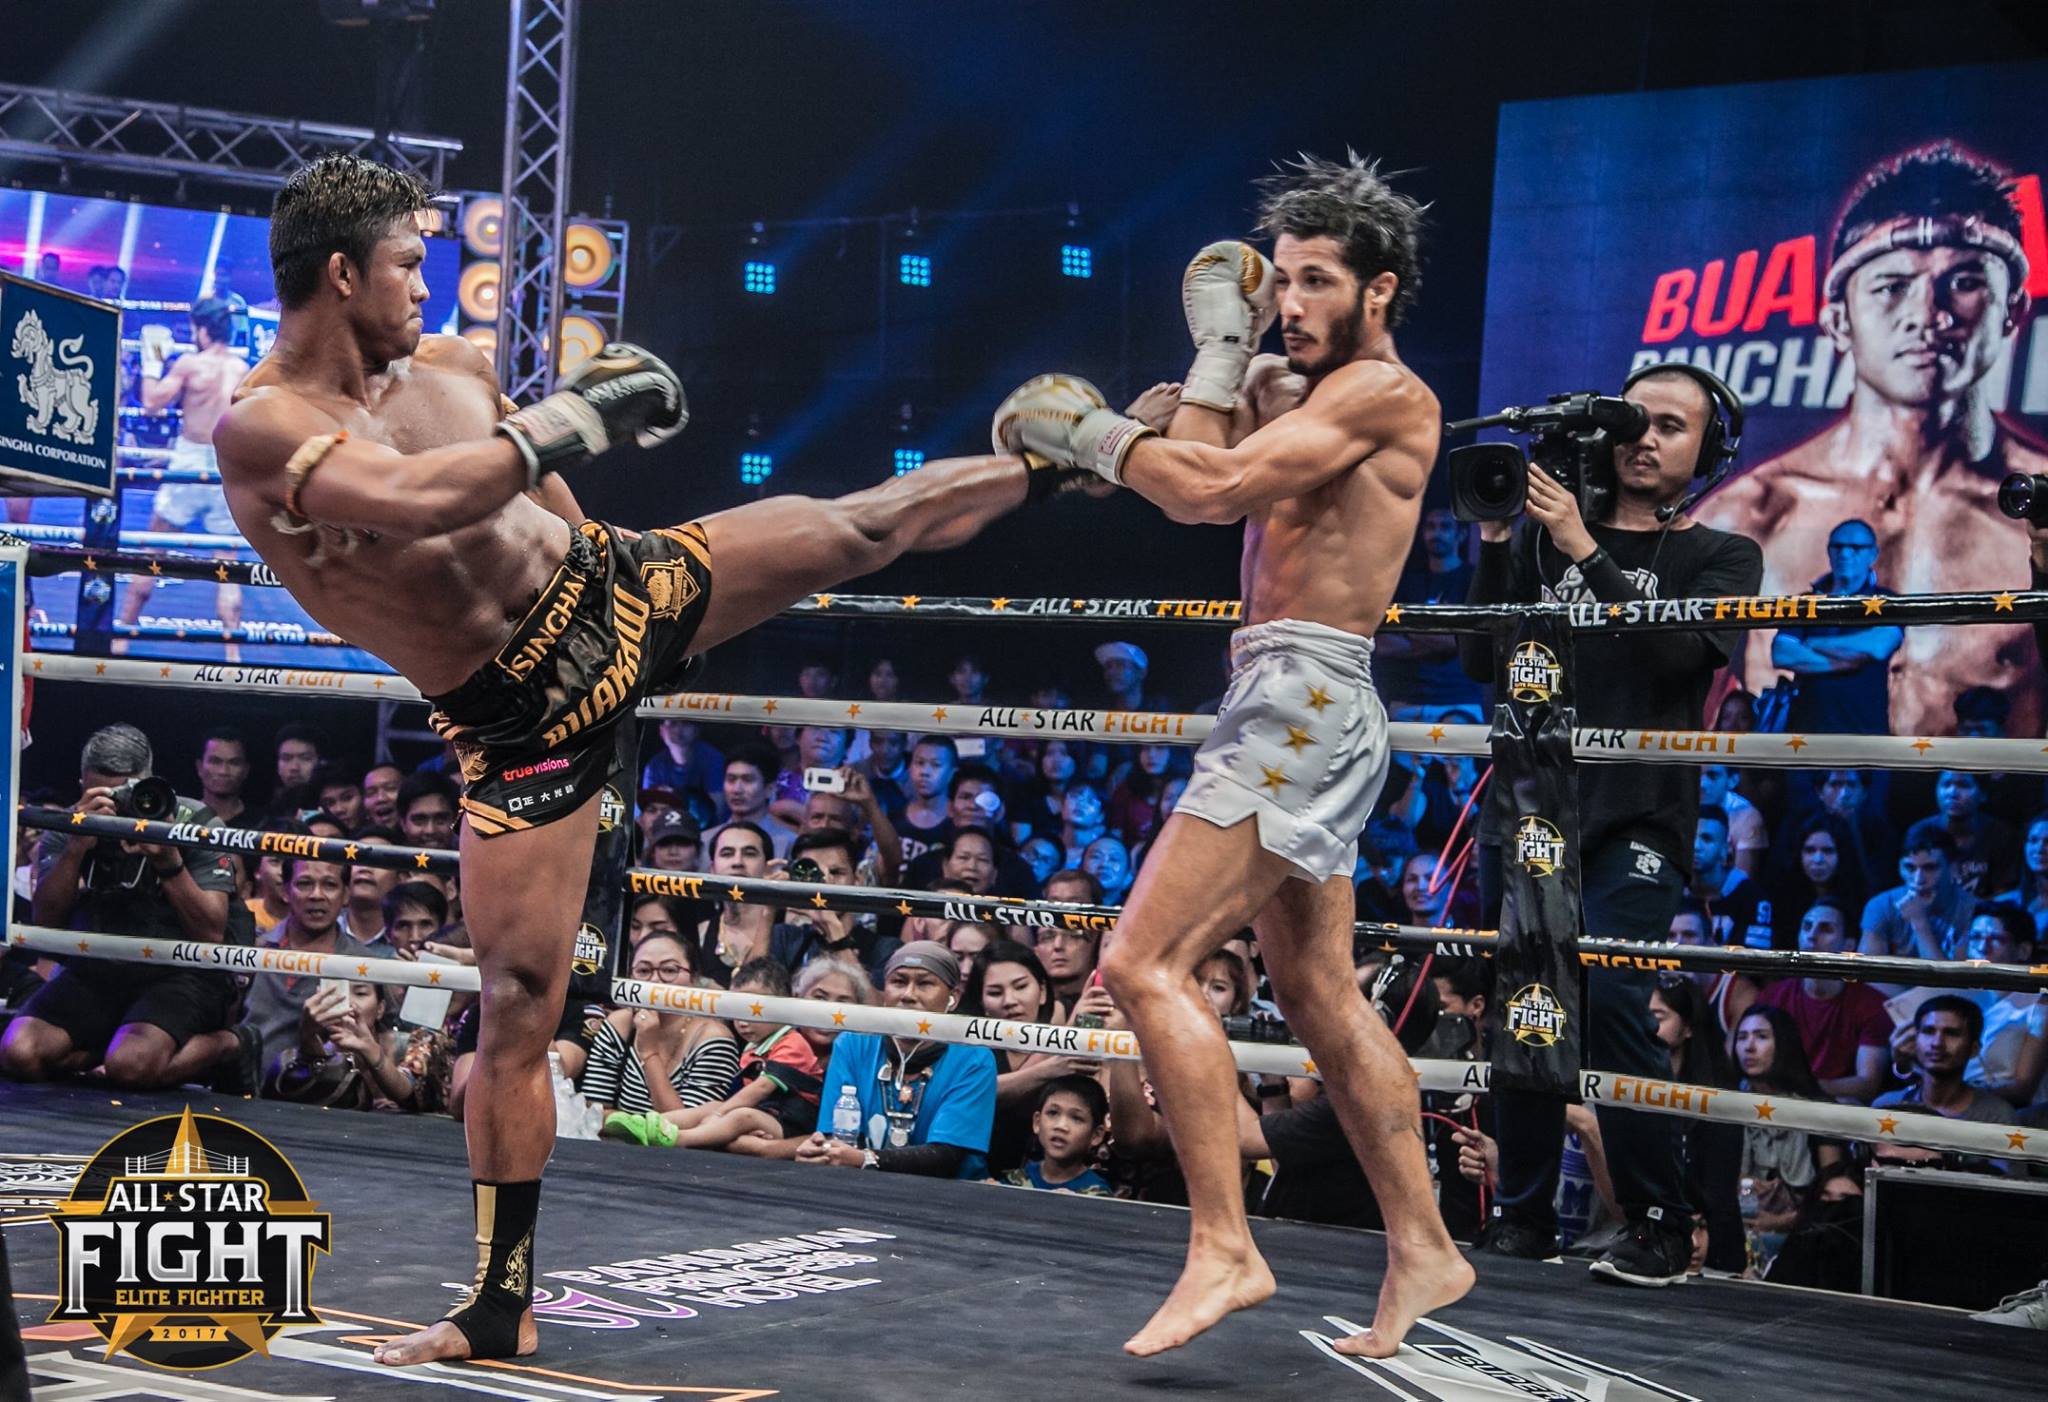 Full Fight Card for All-Star Fight 2 Announced Buakaw, Pakorn, Manach